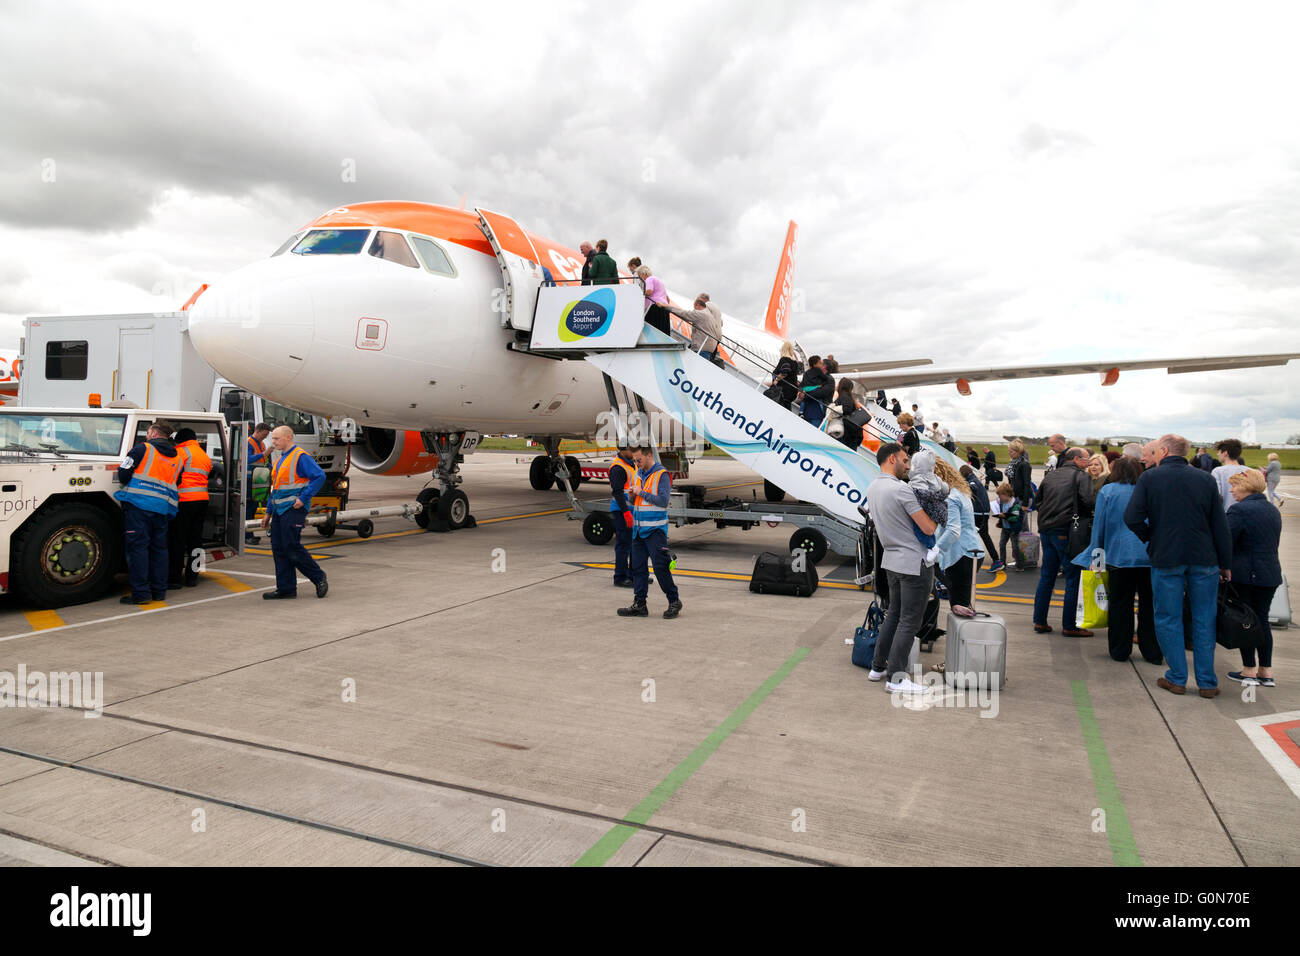 Passengers at London Southend Airport boarding an Easyjet plane on a flight to Malaga, Spain,  Southend Essex UK Stock Photo